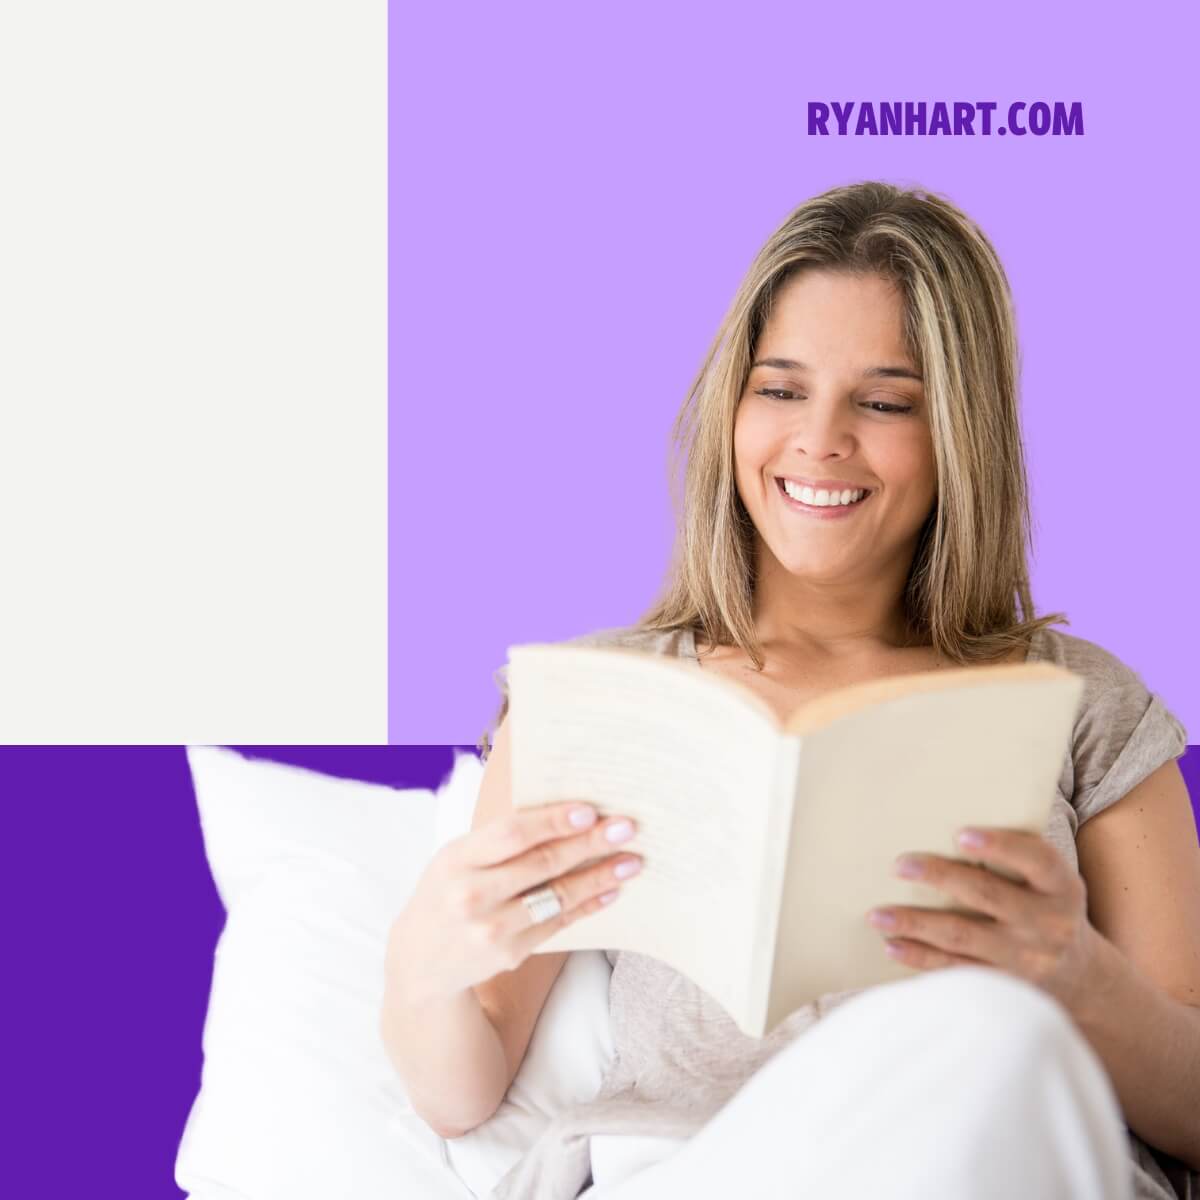 Happy woman reading a book